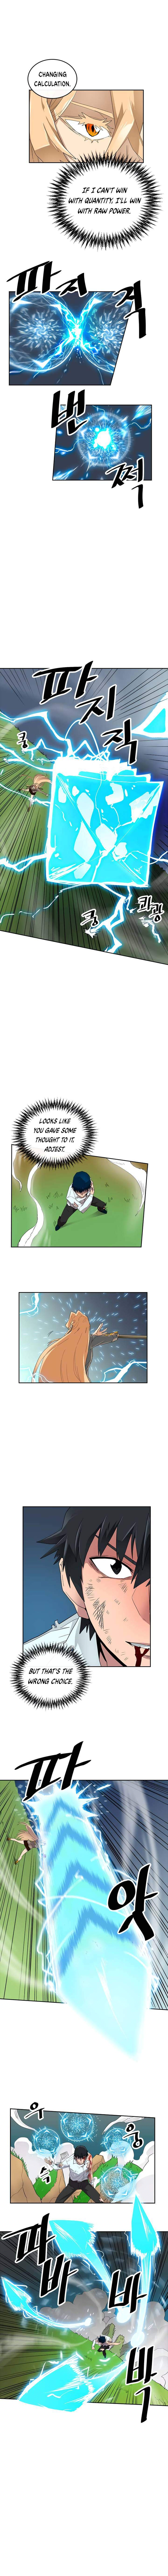 A Returner's Magic Should Be Special - Chapter 7 Page 6